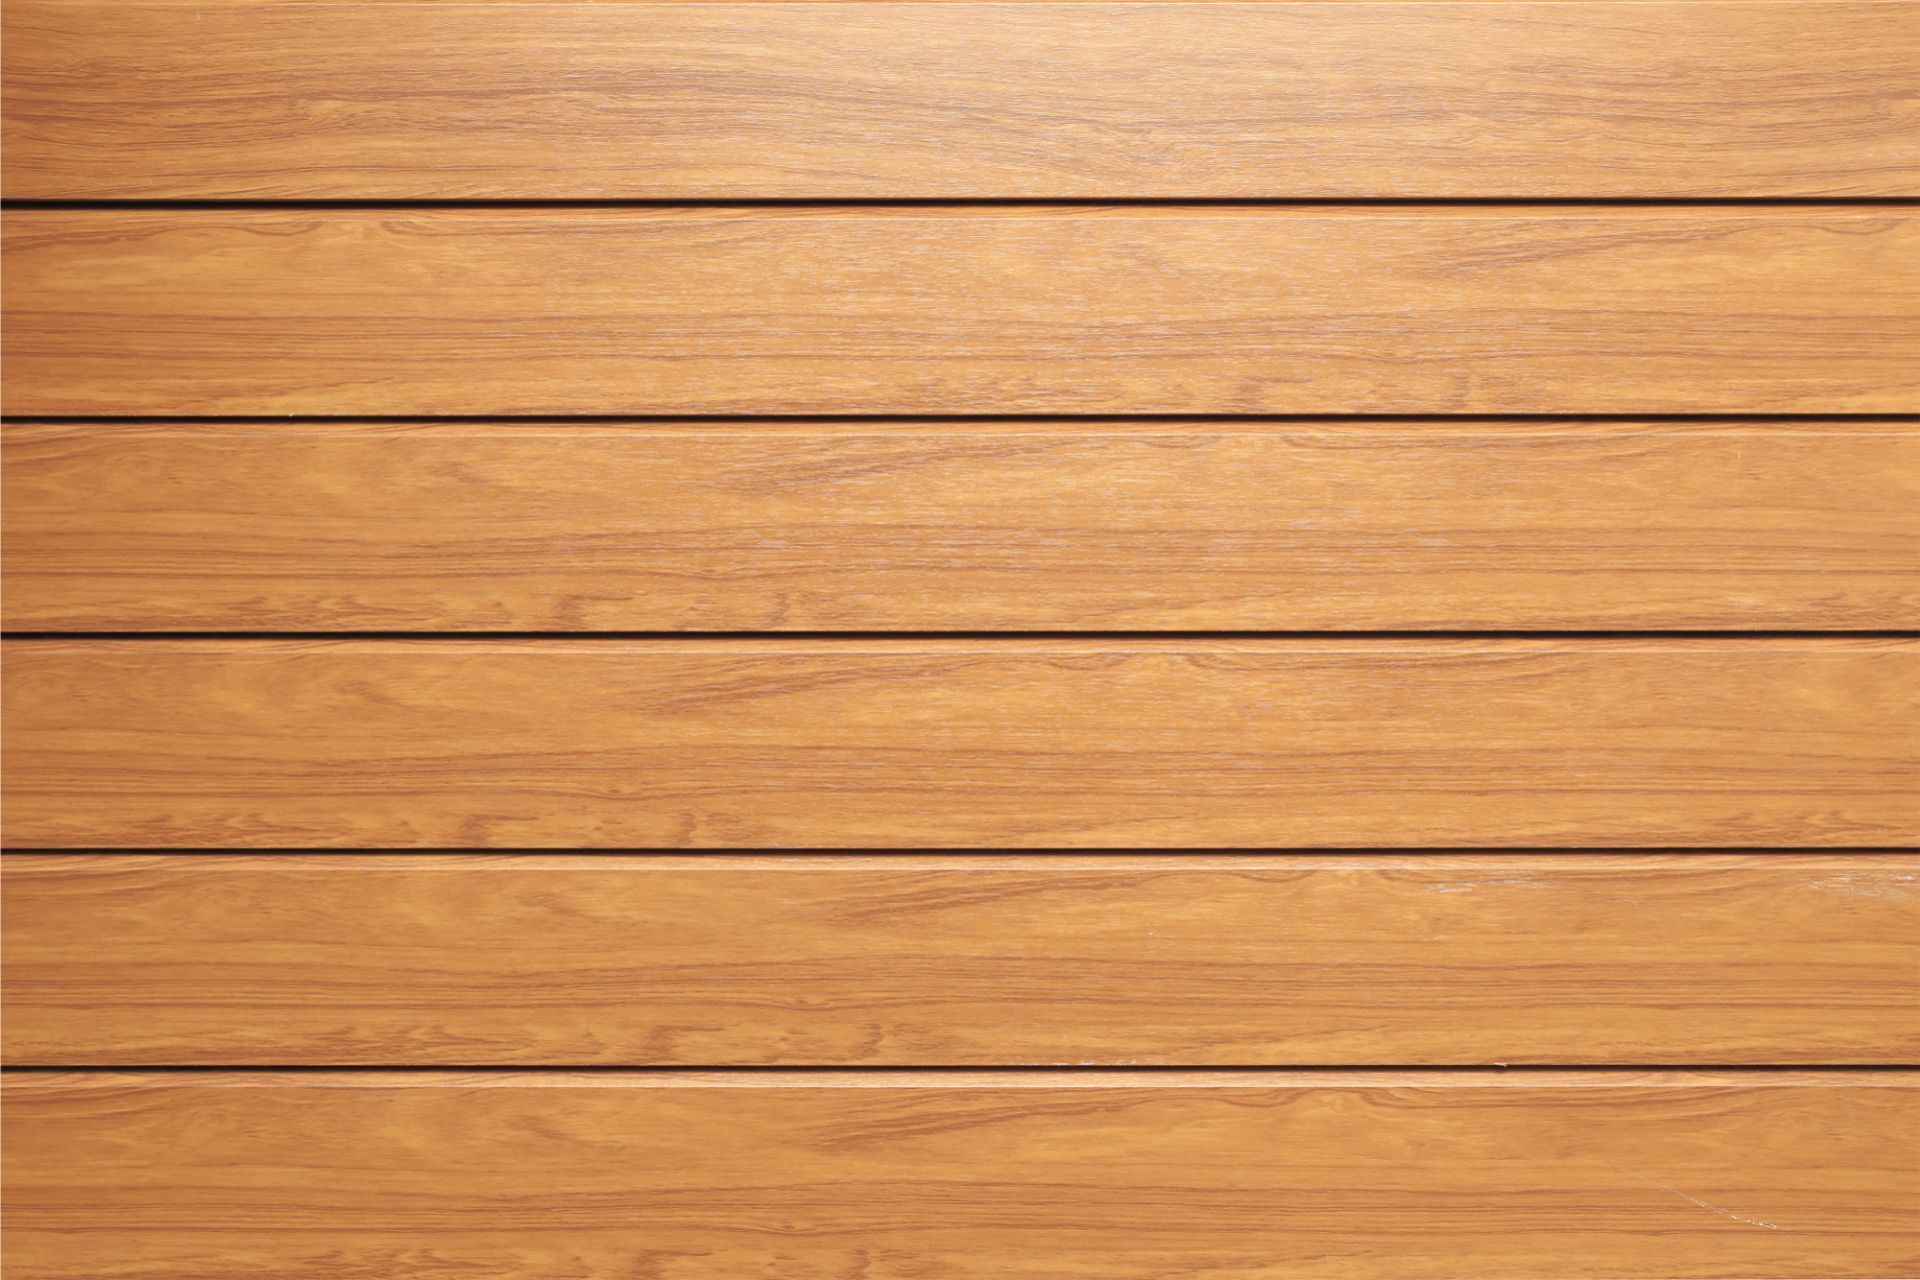 A close-up image of a well-maintained wooden deck with a rich golden stain in Lexington, Kentucky. The deck boards are aligned horizontally, showing a smooth, polished surface and the natural wood grain. The seamless finish suggests professional quality workmanship, emphasizing the beauty of outdoor wooden construction and care.